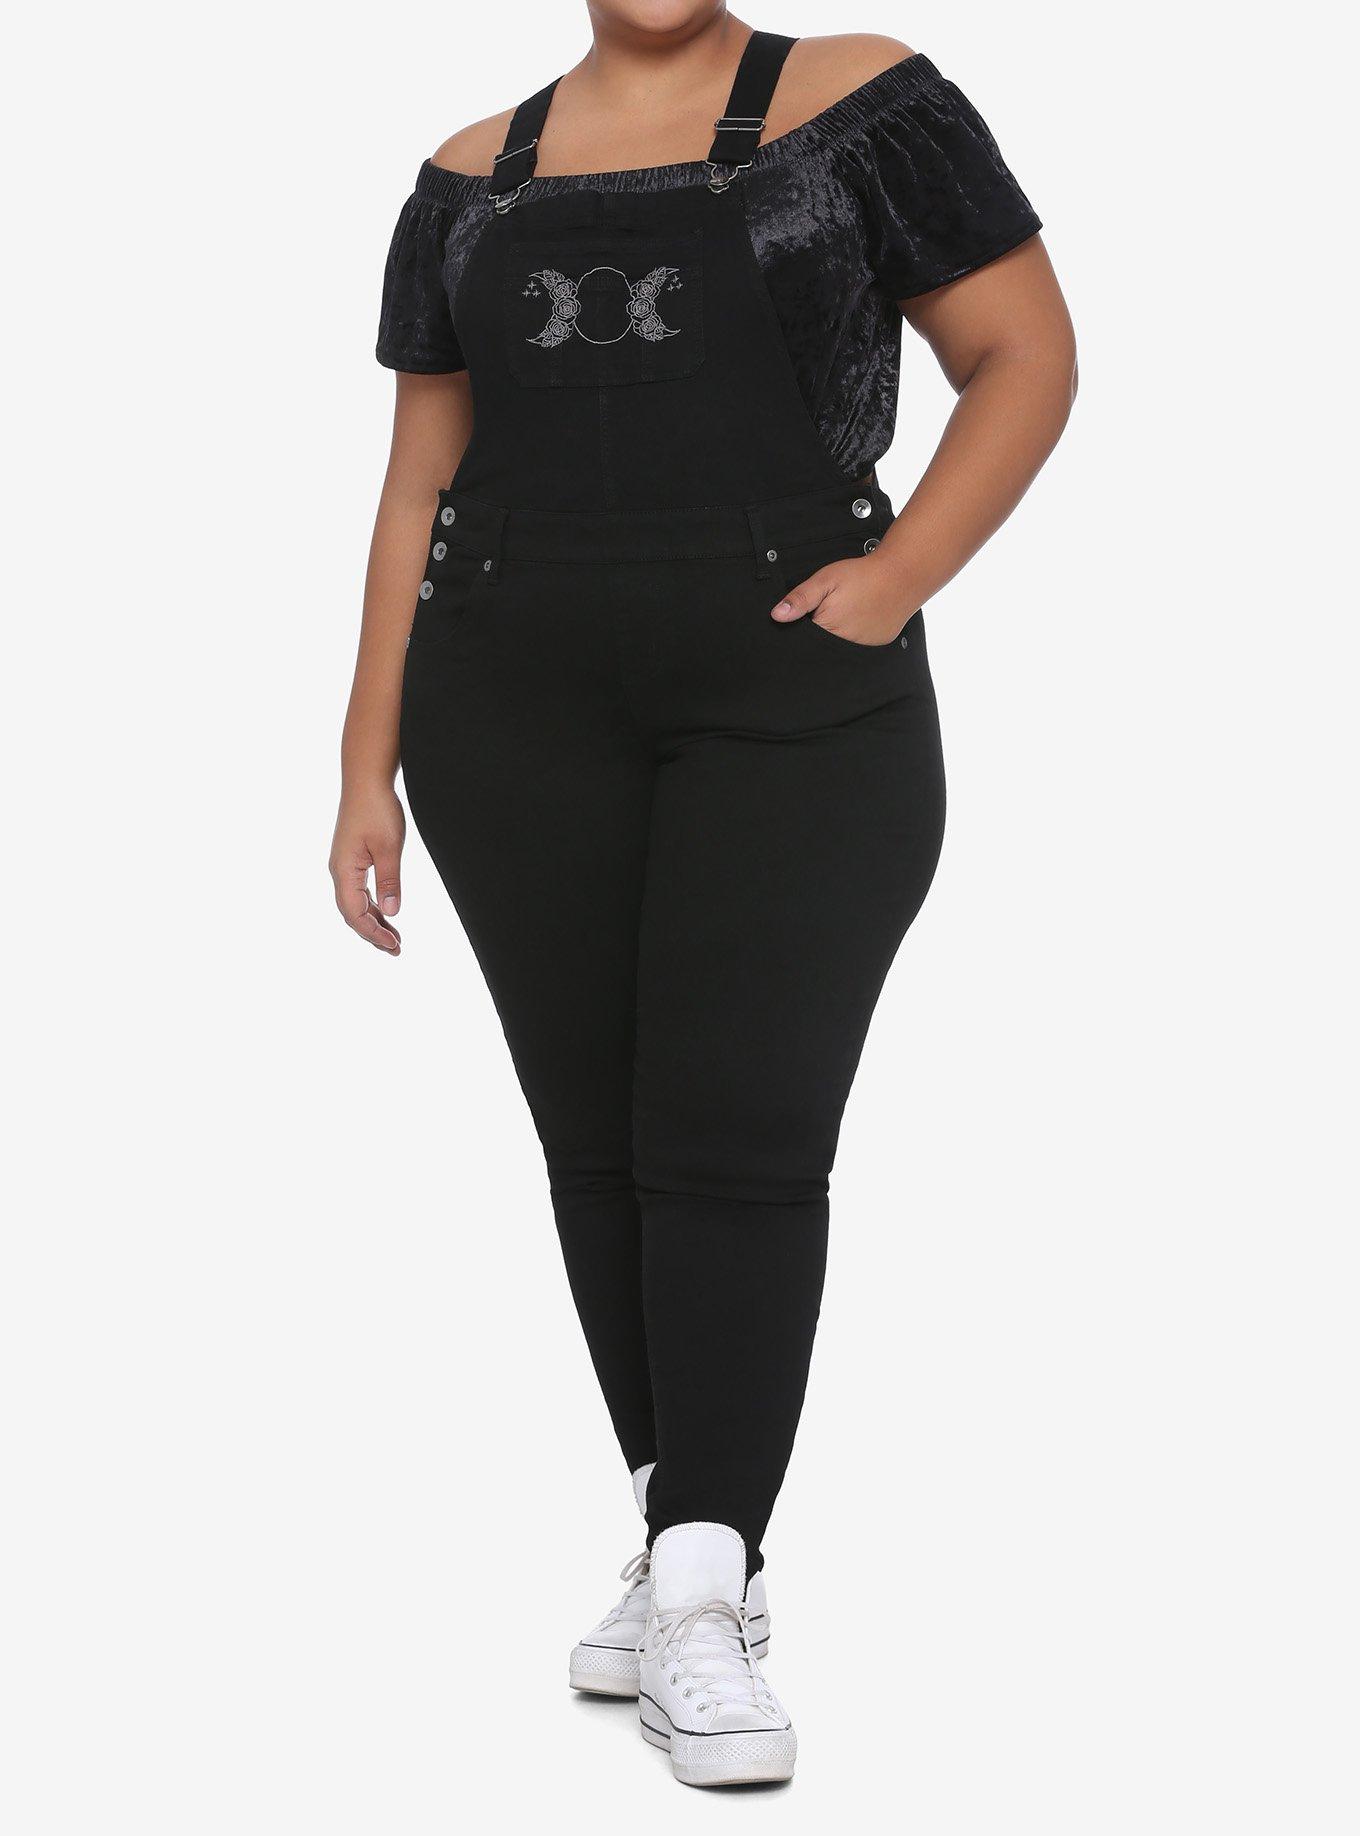 Moon Embroidery Overalls Plus Size, BLACK, hi-res